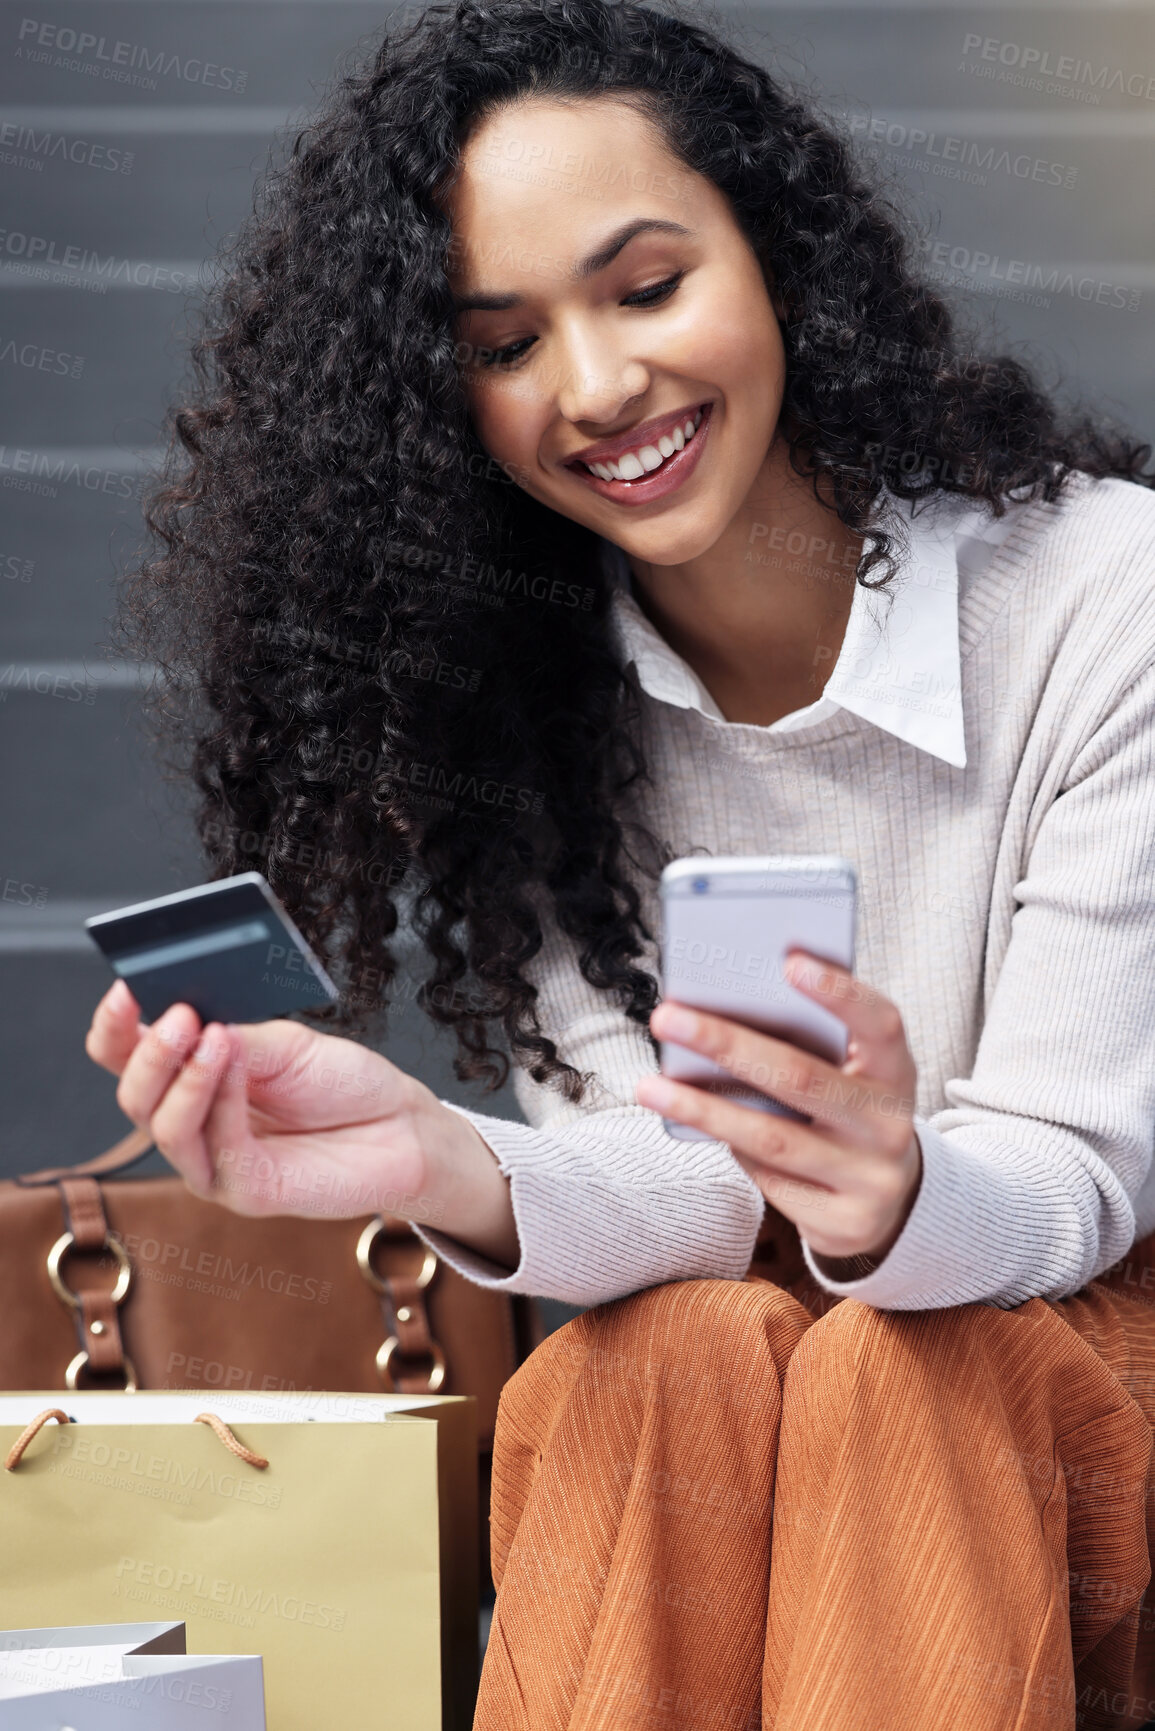 Buy stock photo Online shopping, payment and customer with phone and credit card for fintech online payment of sale product. E commerce banking, digital retail and black woman happy with gift card financial purchase